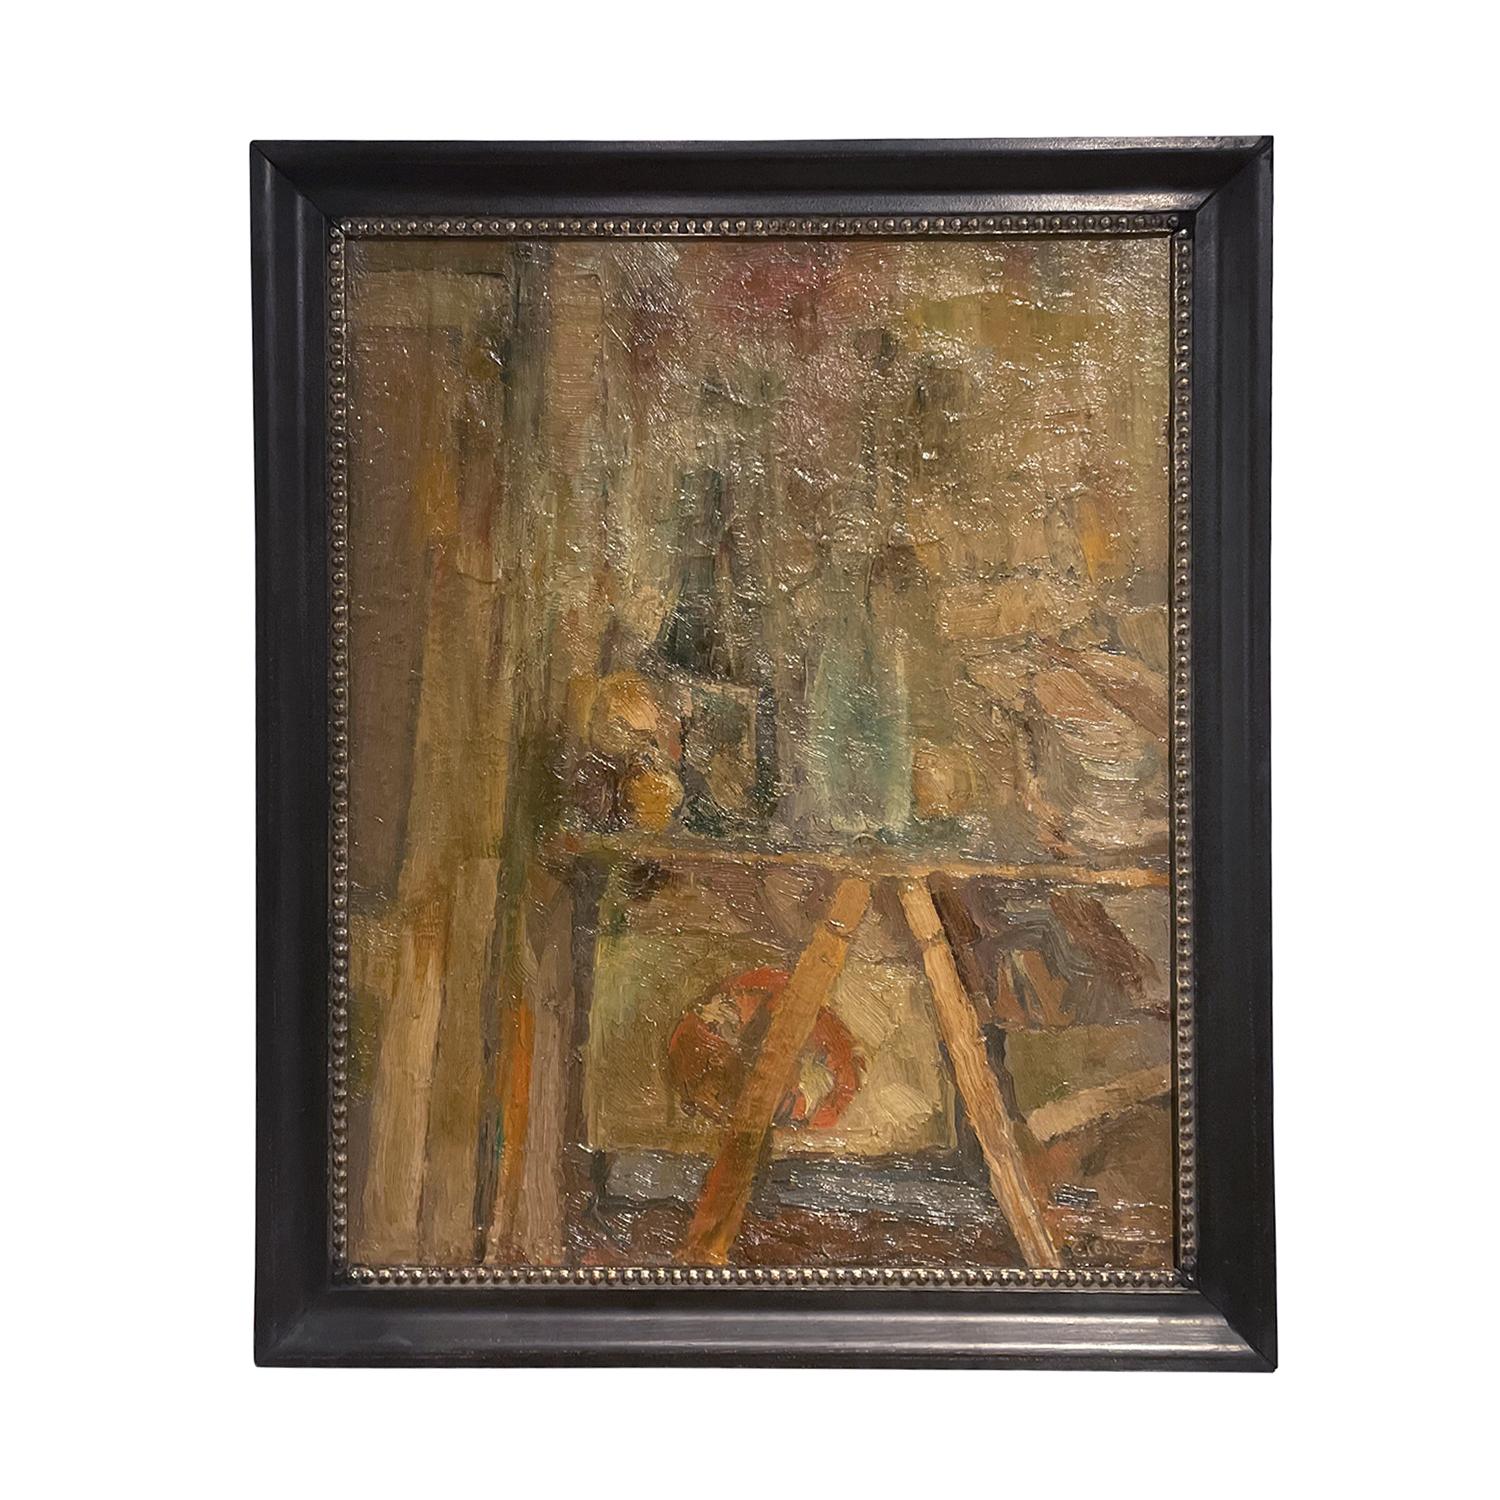 A beige-brown, vintage Mid-Century Modern French still life oil on wood painting, portraying a sunny day in an artist, work room painted by Daniel Clesse in good condition. The room depicts a foldable wooden work table with large wine bottles and